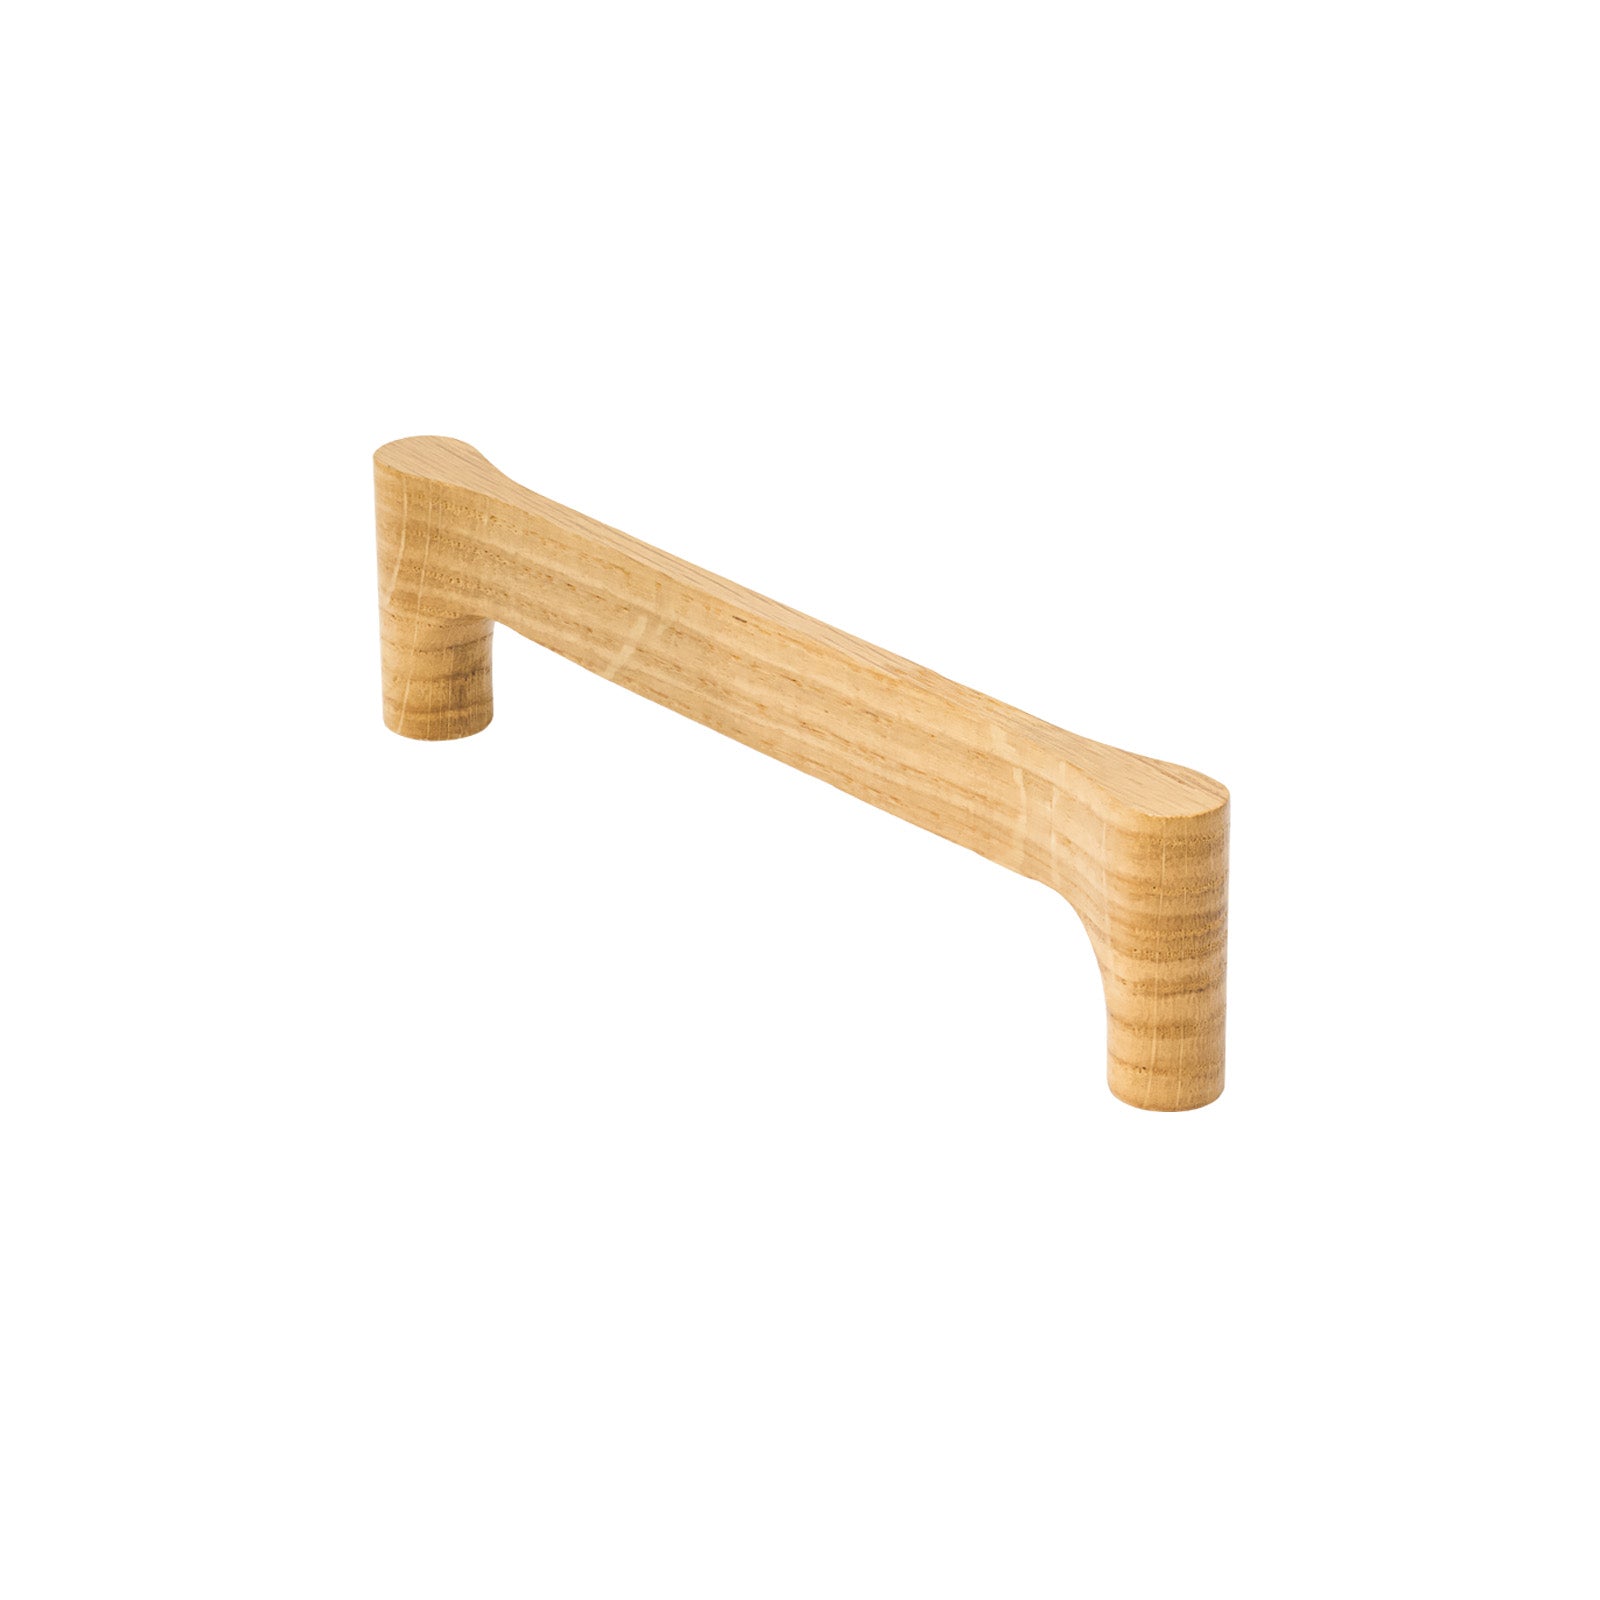 SHOW 160mm Gio Cabinet Pull Handle In Oak Finish